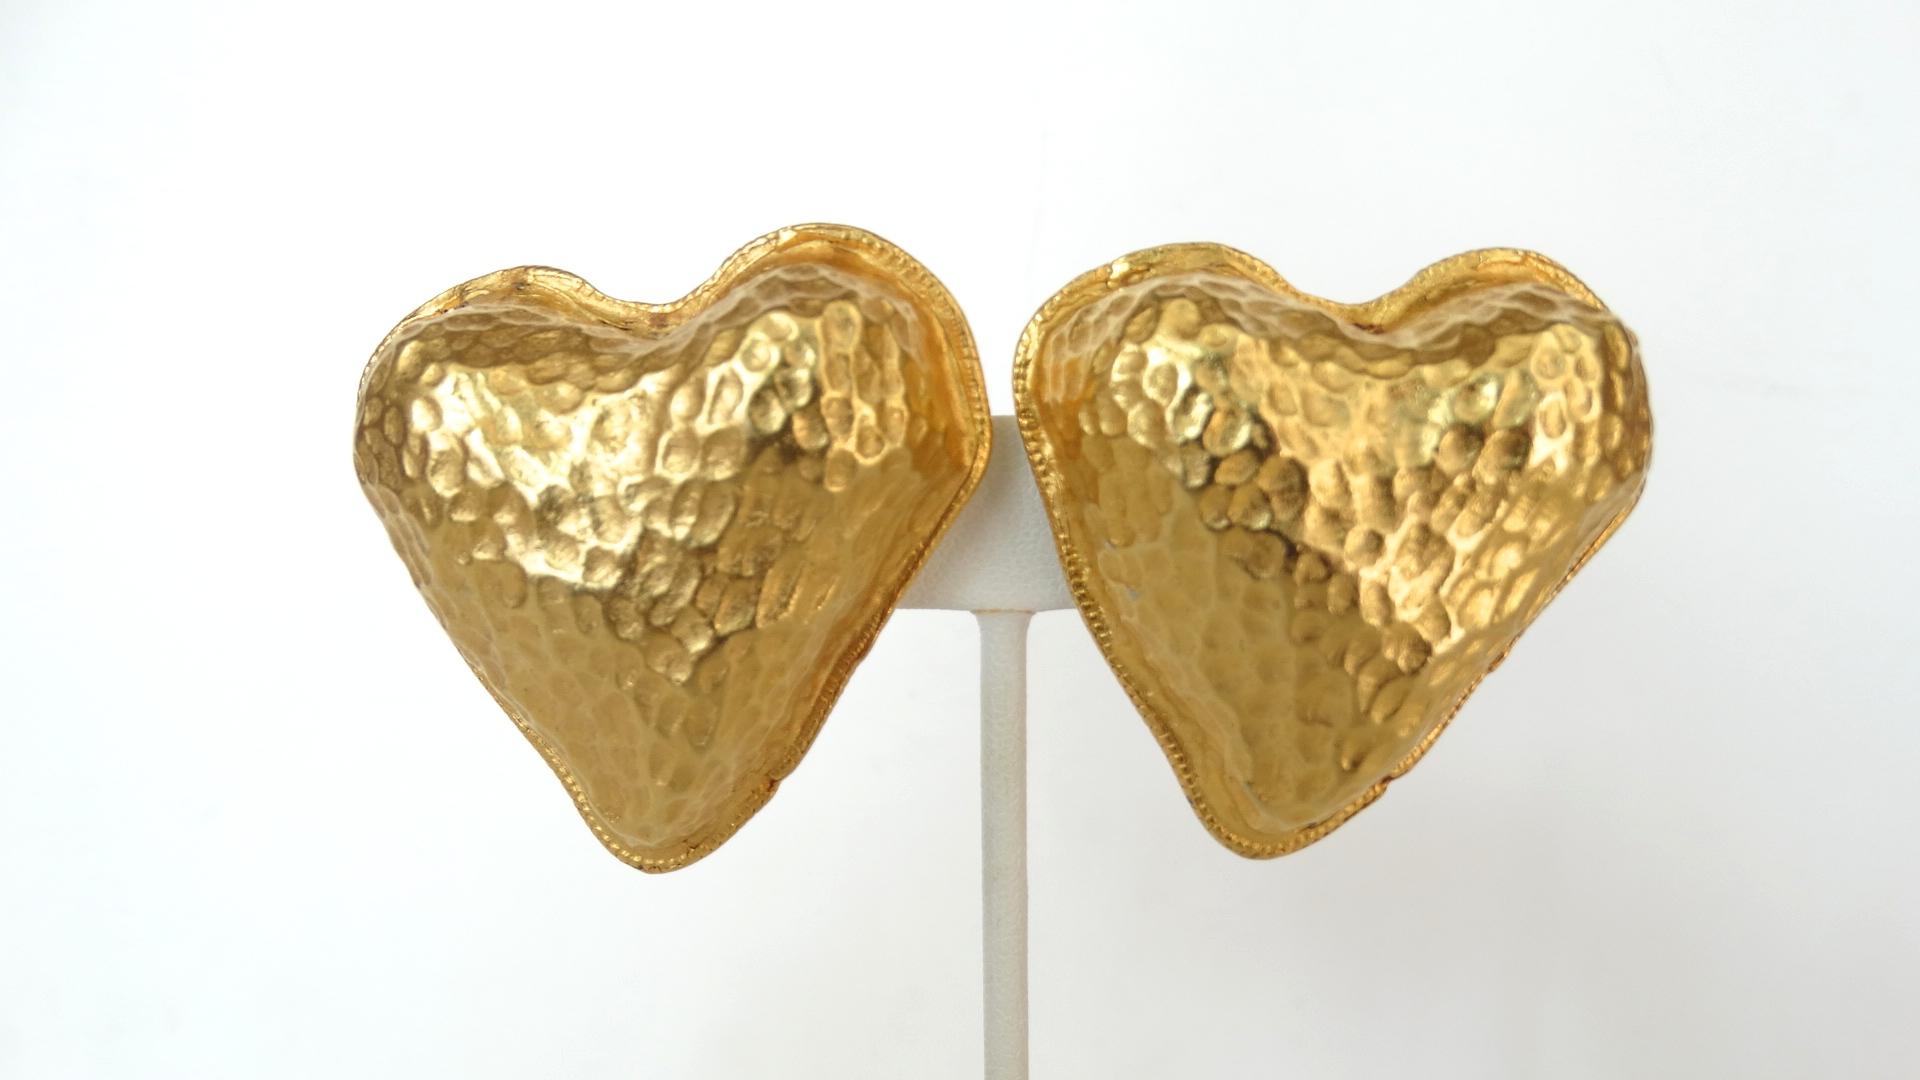 Feel The Love With These Amazing Heart Earrings! Circa 1980s, these gold plated Yosca clip-on earrings are in the shape of an abstract heart and features a textured trim and detailing on the front. The perfect pair of artsy earrings for your next